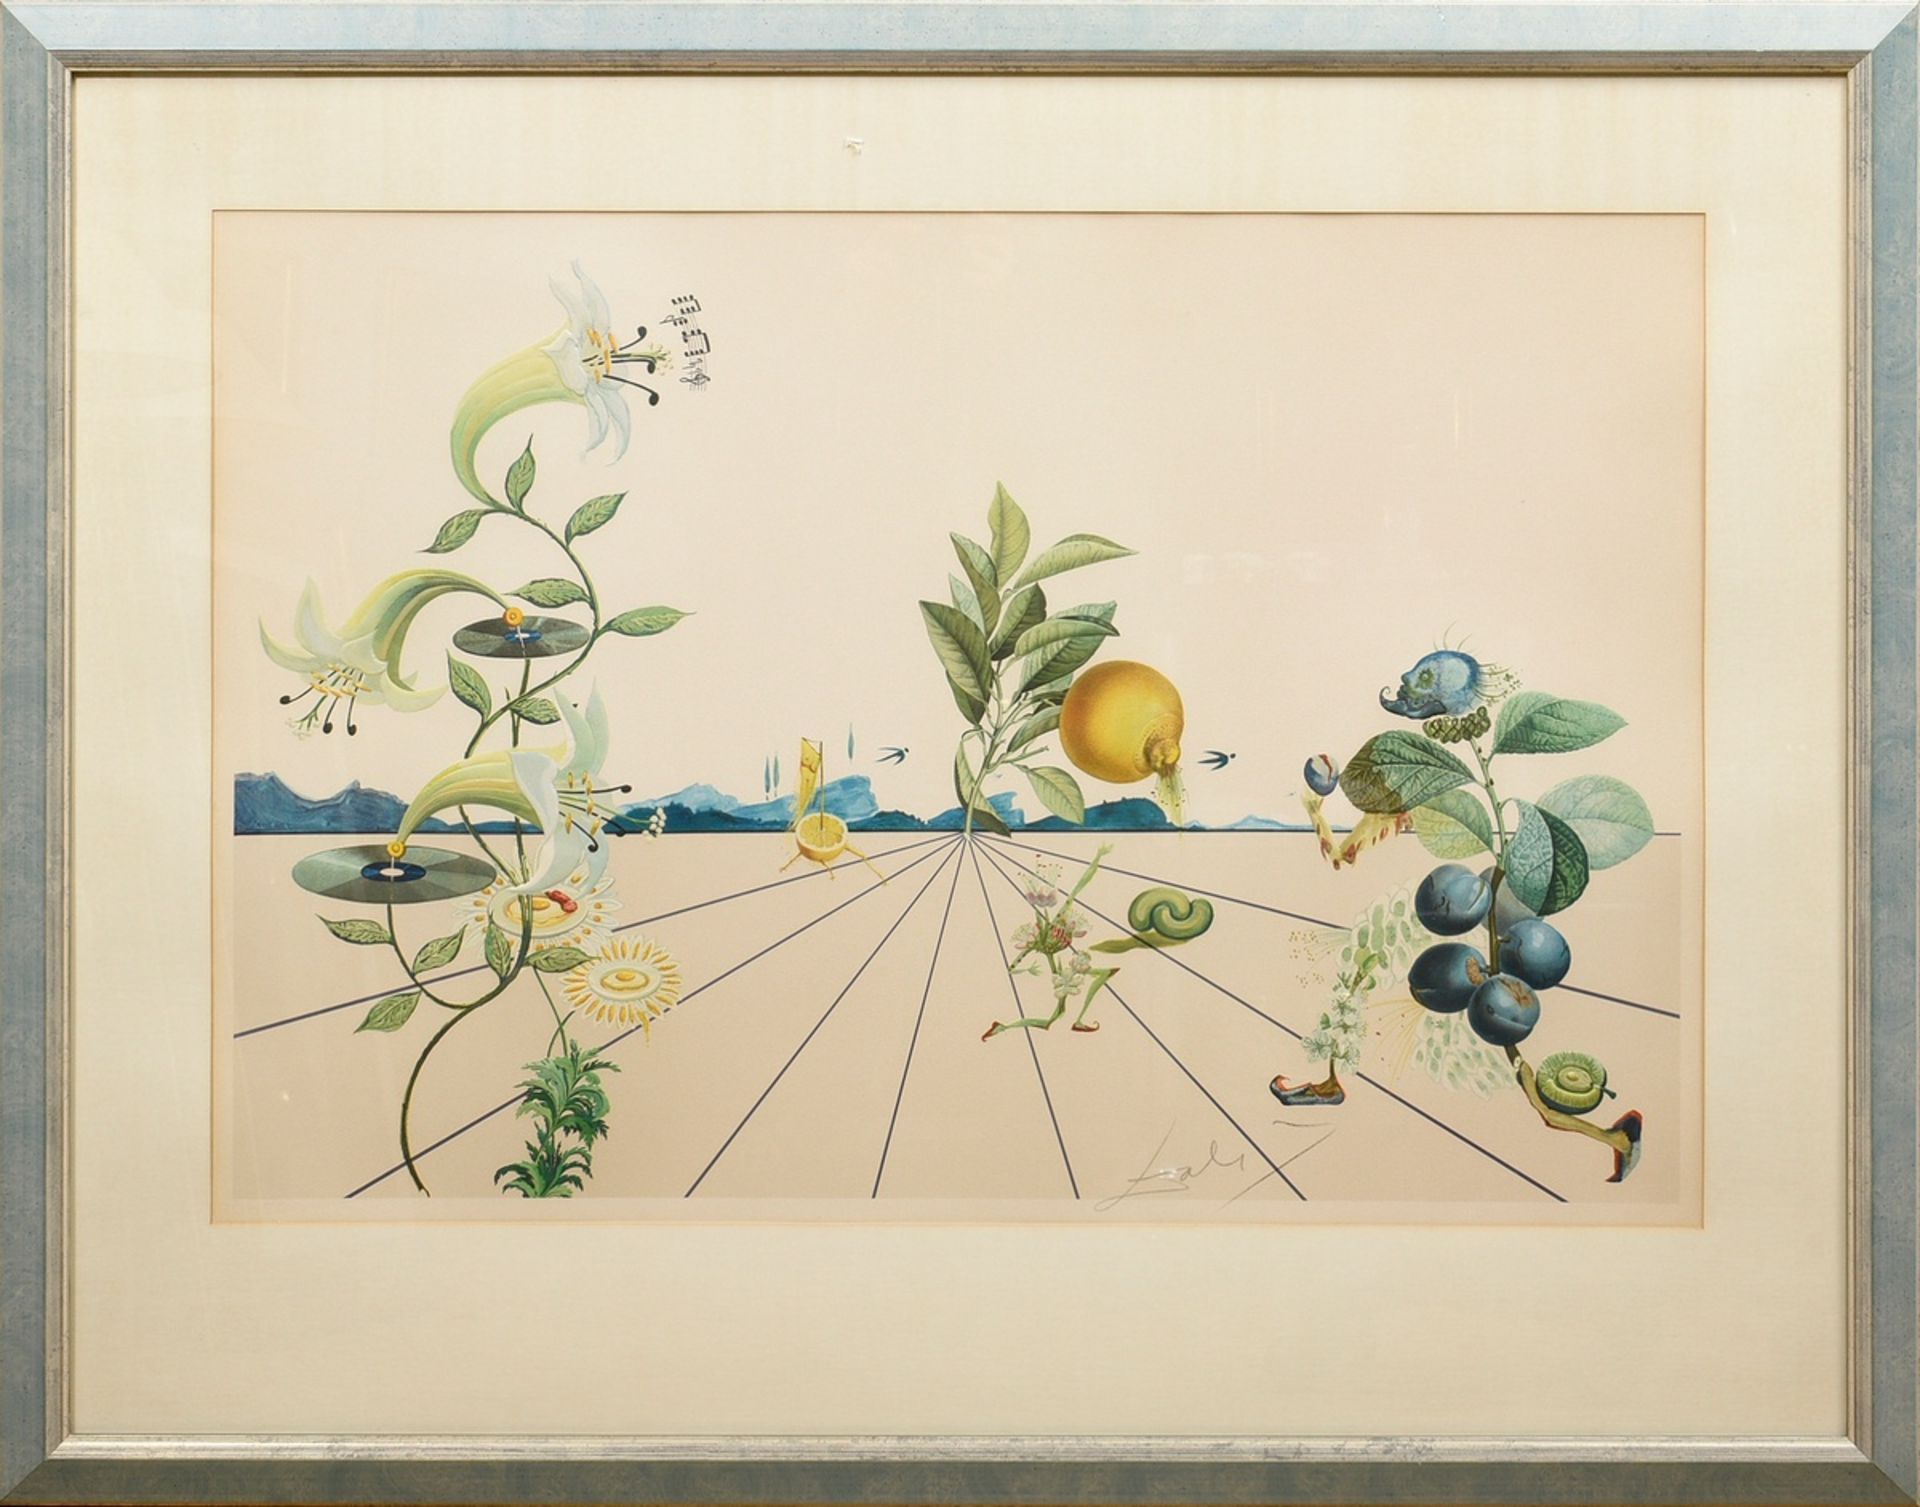 Dalí, Salvador (1904-1989) "Flordali I" 1981, colour lithograph with relief embossing, 2458/4480, s - Image 2 of 4